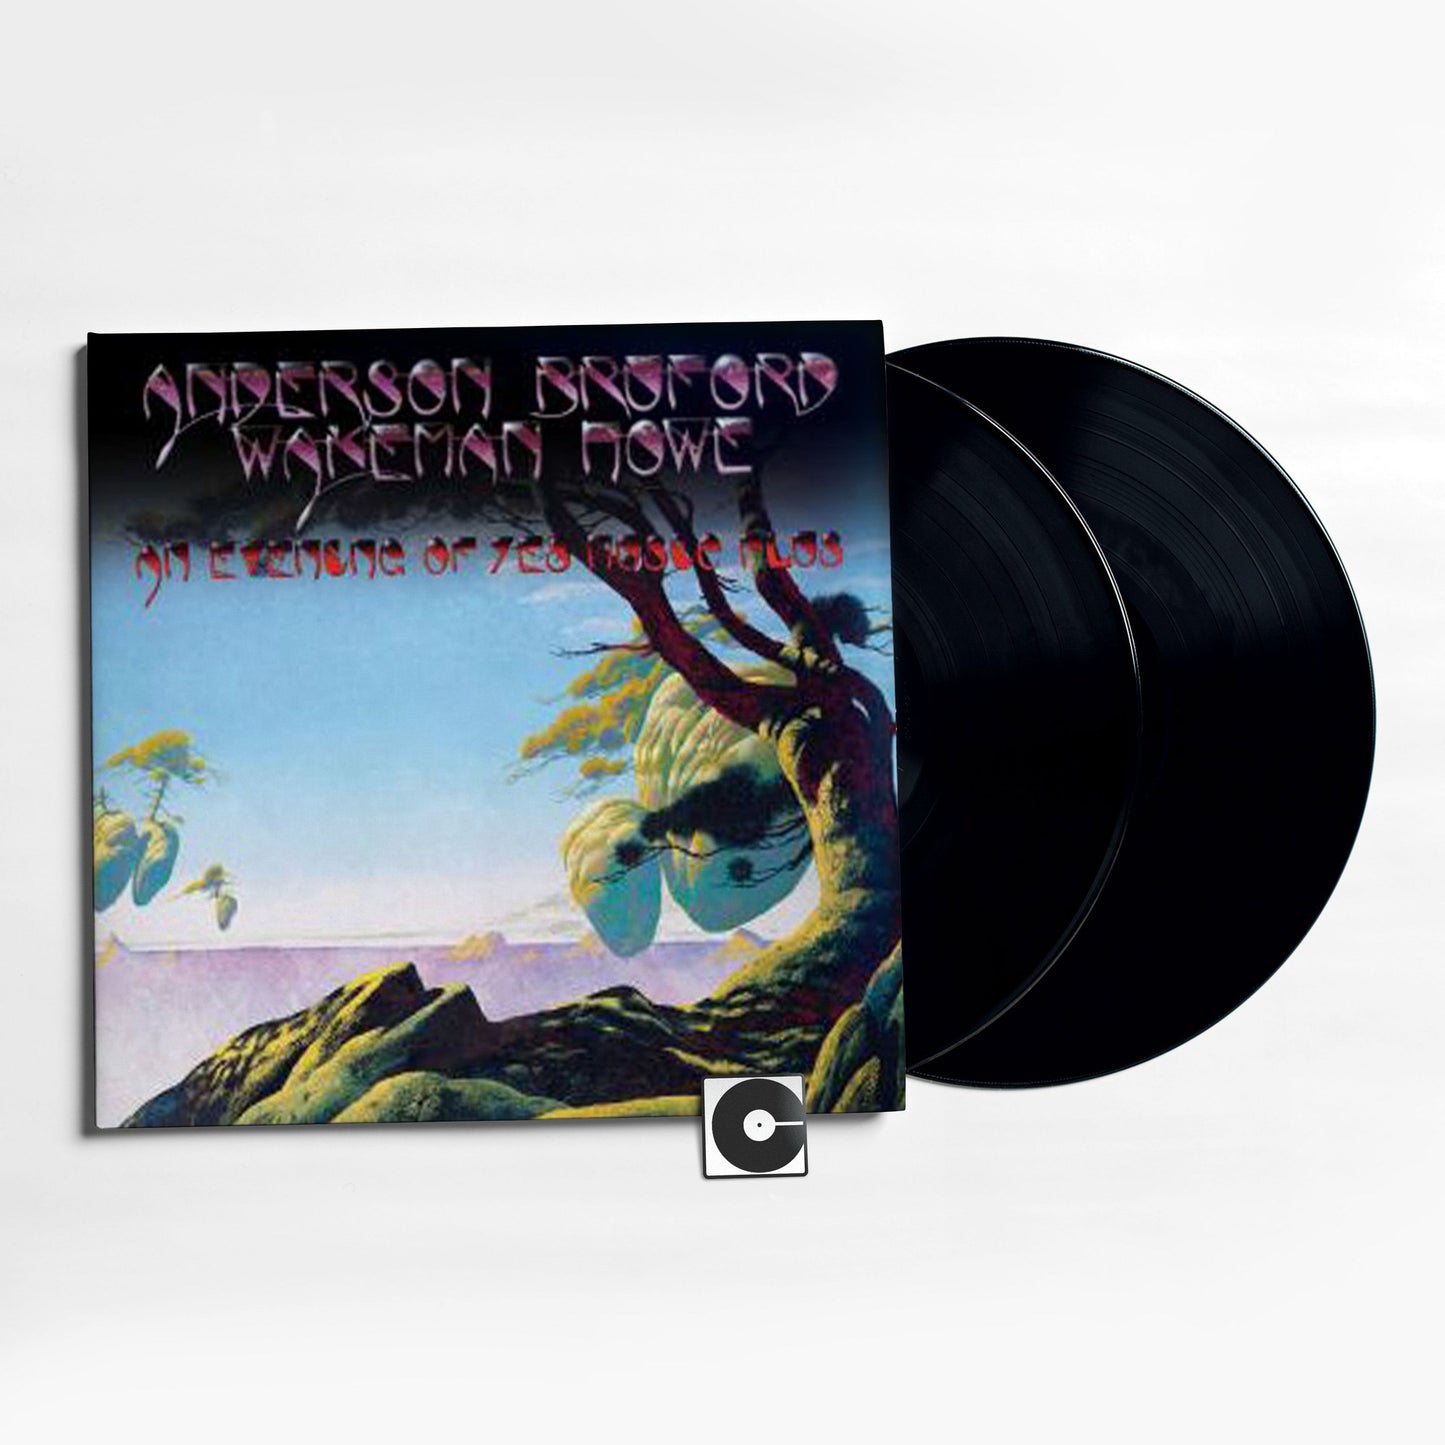 Anderson Bruford Wakeman Howe ‎- "An Evening Of Yes Music Plus - Vol. 1"